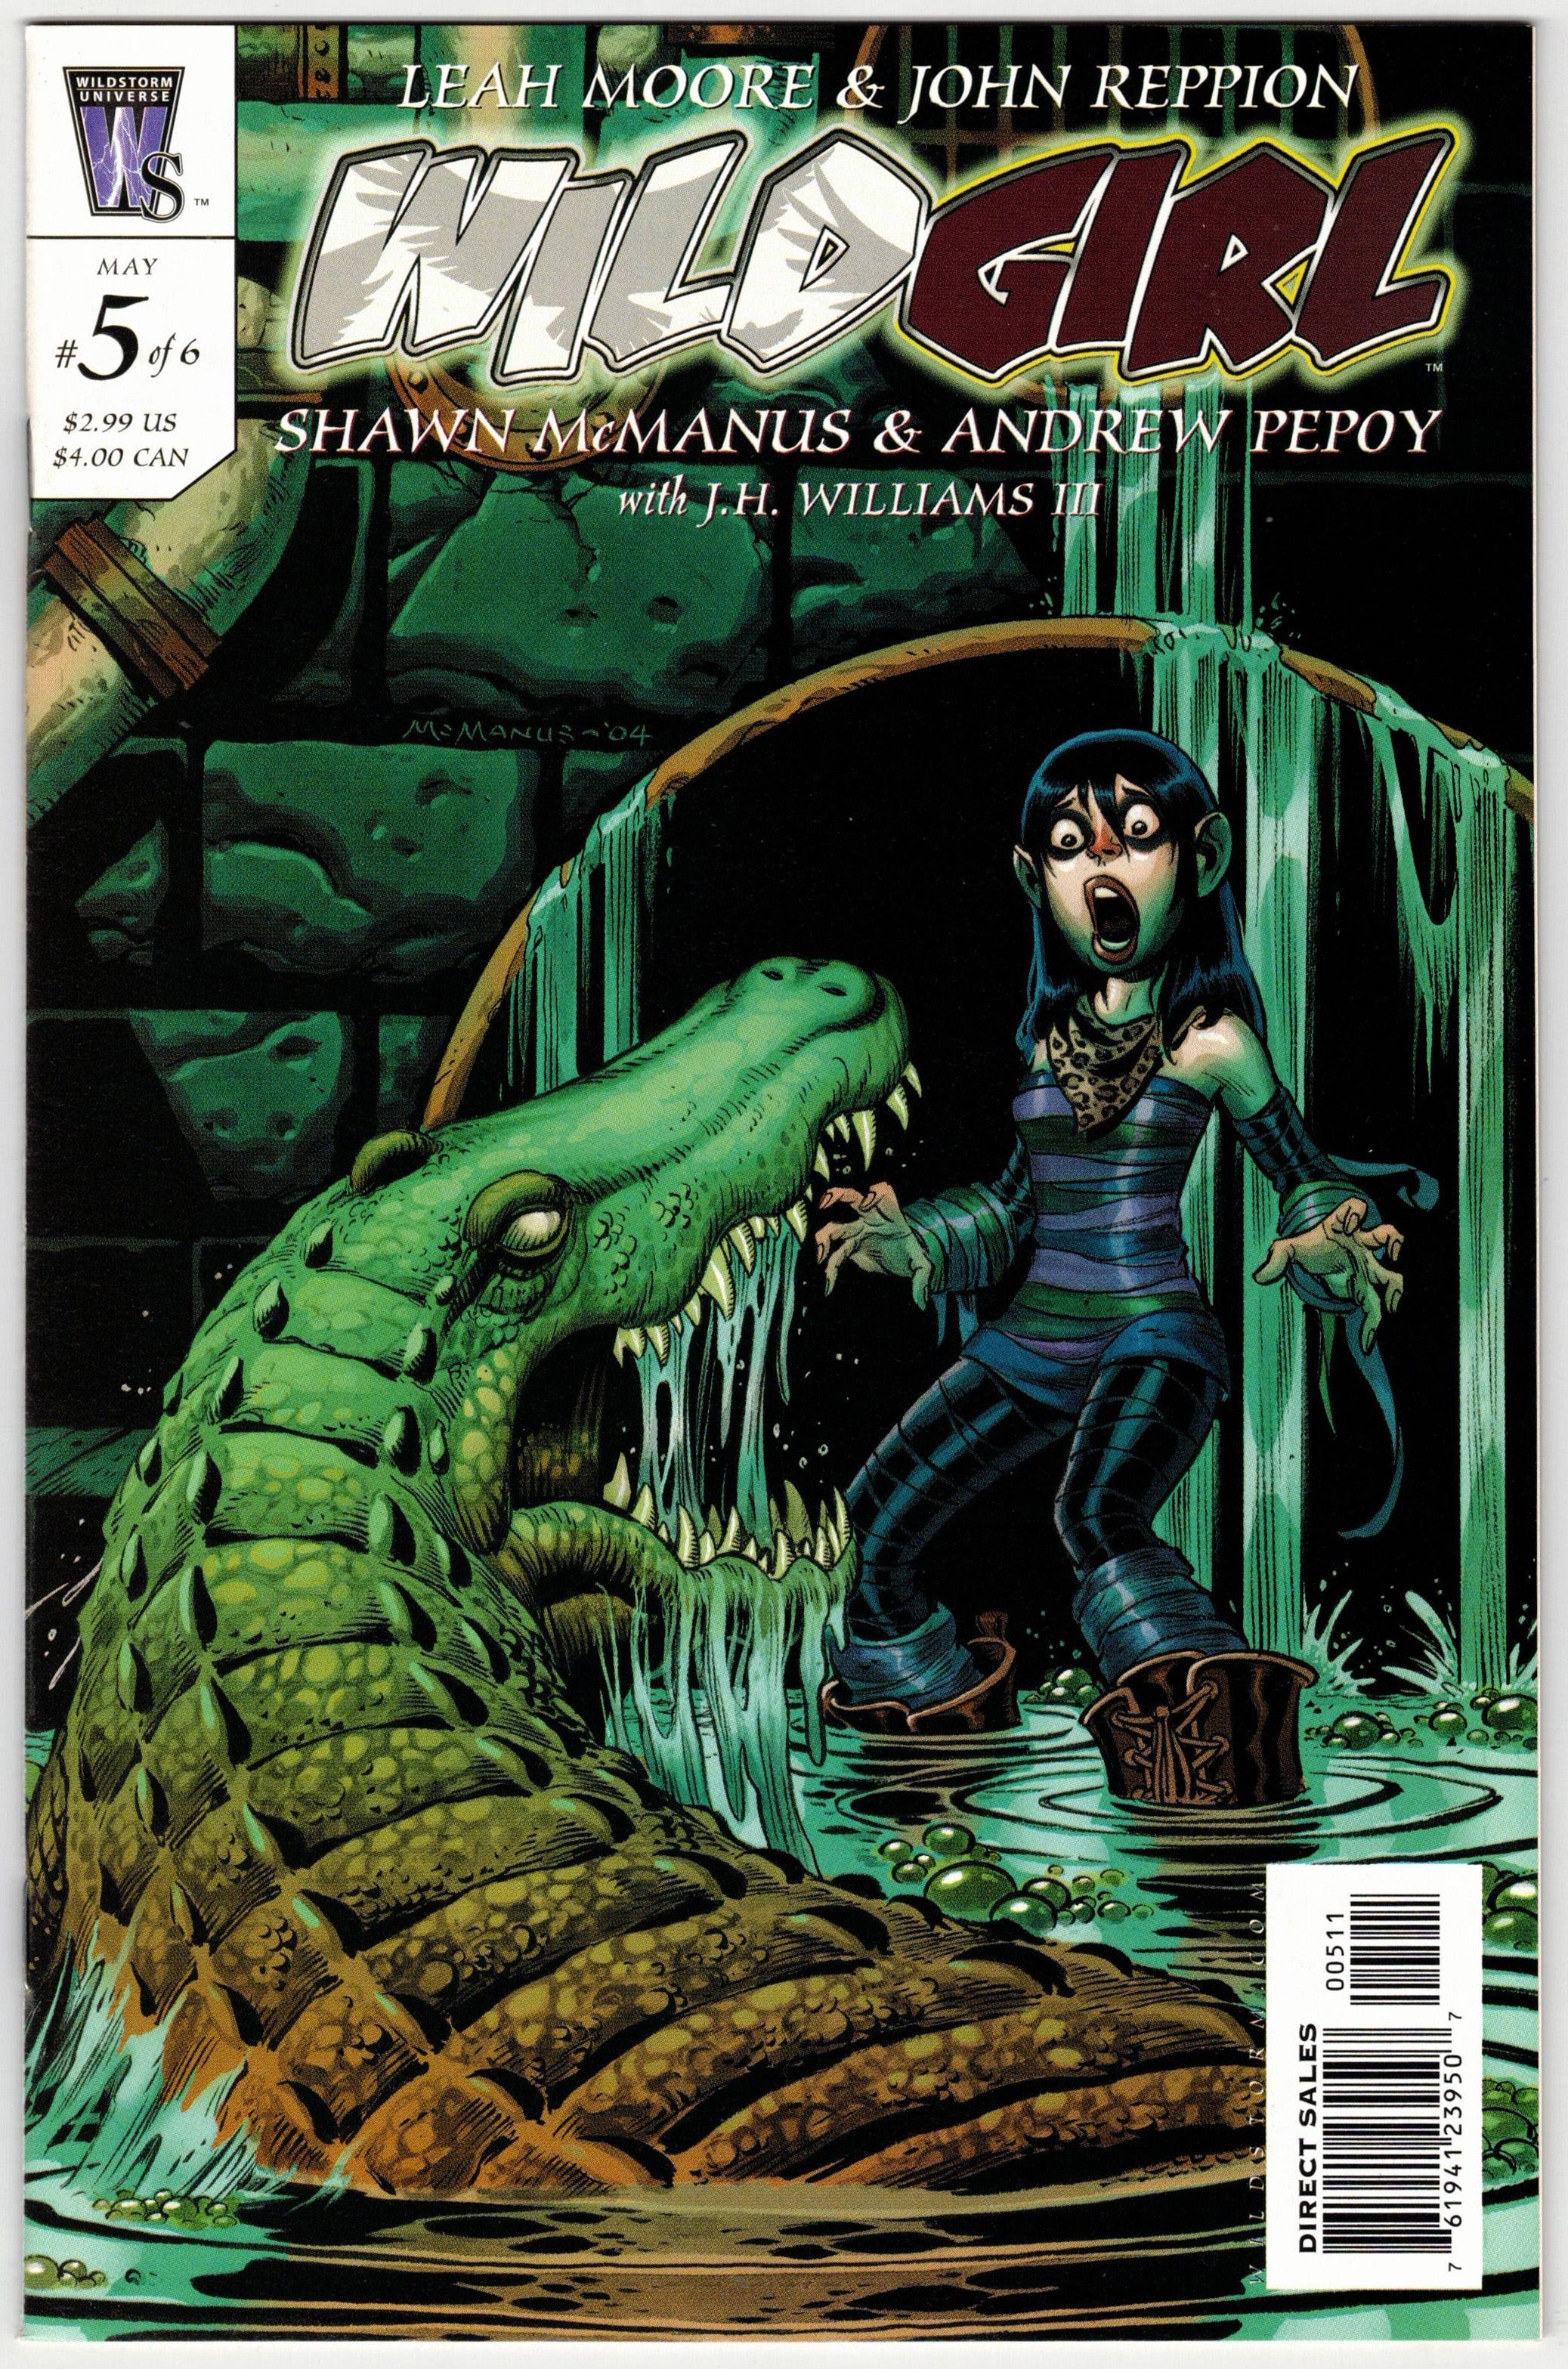 Photo of Wild Girl (2005) Issue 5 - Comic sold by Stronghold Collectibles